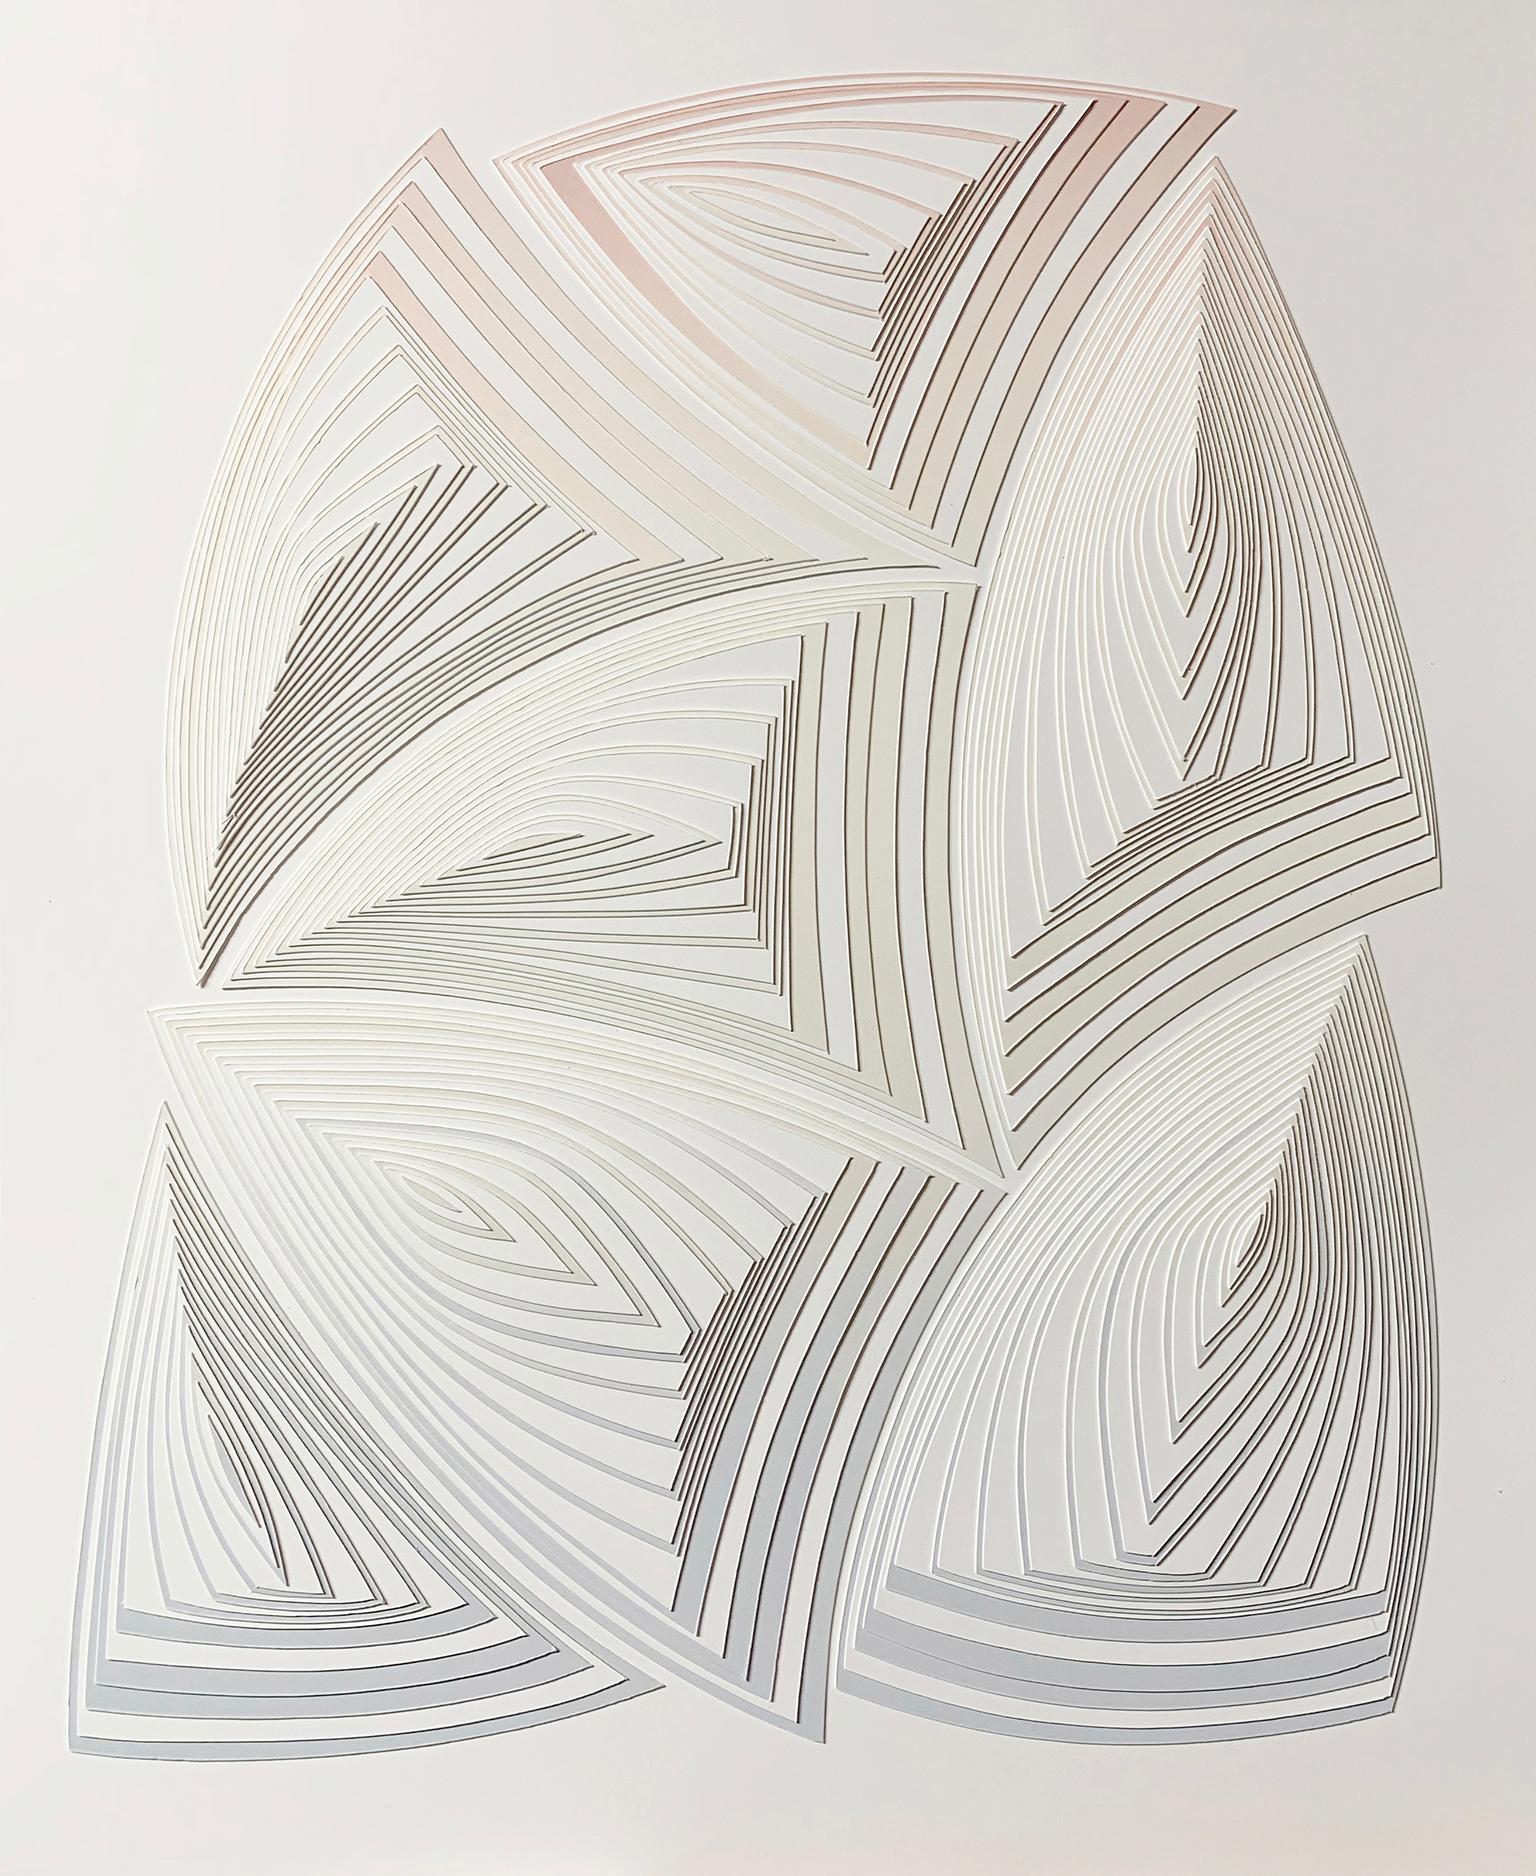 Cut Work, Freehand Cut with Surgical Scalpel, Silk-Screened: 'Soft Fade-Out'  - Mixed Media Art by Elizabeth Gregory-Gruen